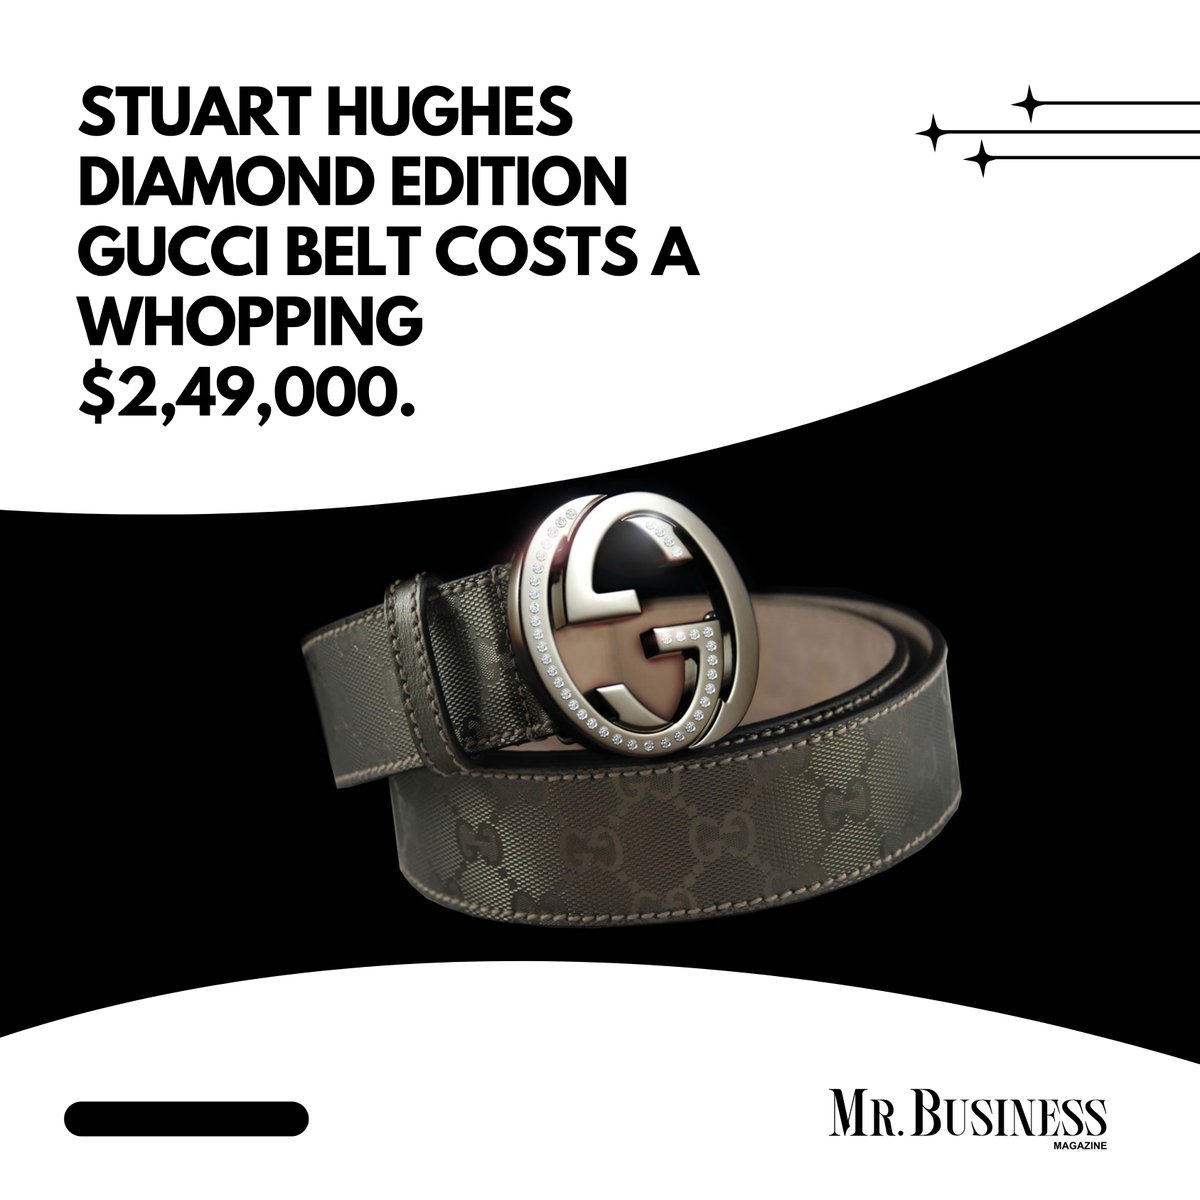 ✔Gucci has the most expensive belt. The price of it will shock you! 
For more information
📕read - mrbusinessmagazine.com
and Get Insights 
#Gucci #LuxuryFashion #Expensive #Clickbait #Headline #Fashionista #StyleStatement #MrBusinessMagazine